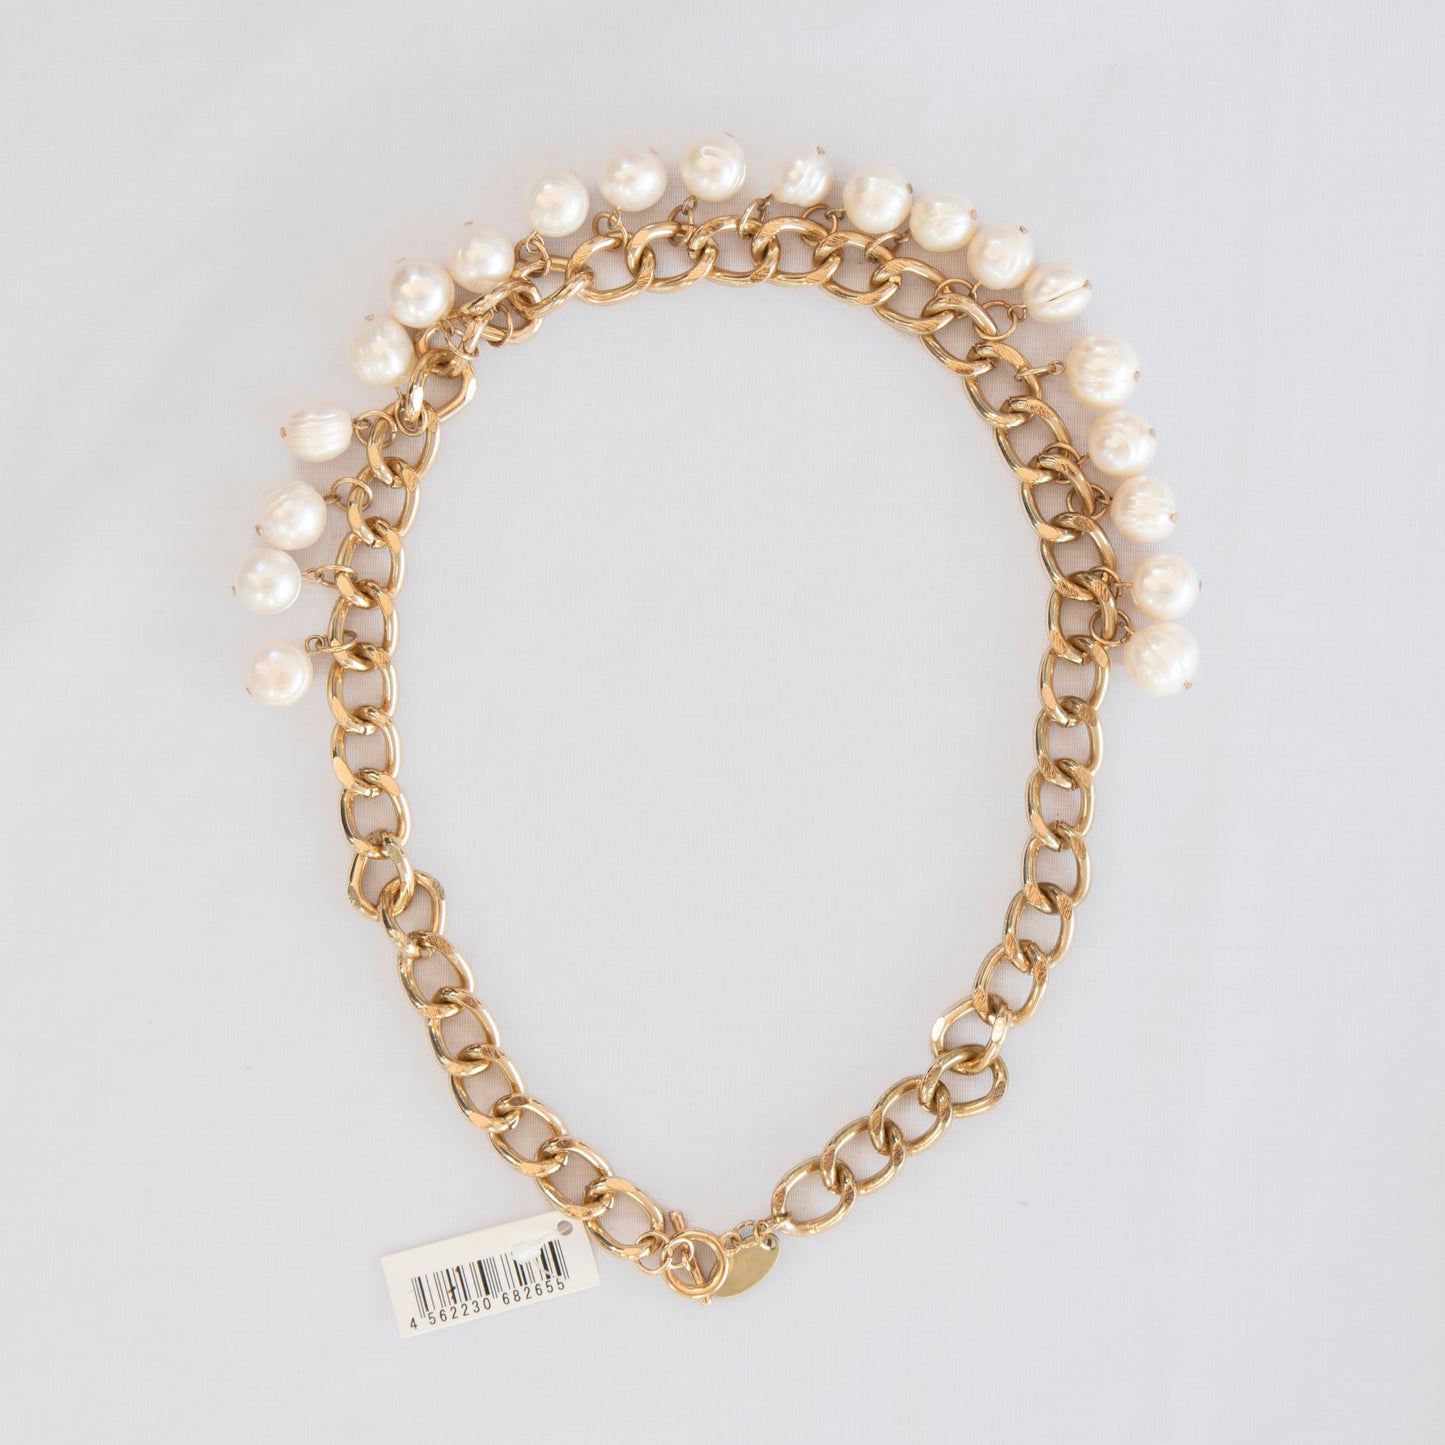 Stellar Hollywood - White Pearl Chain Necklace